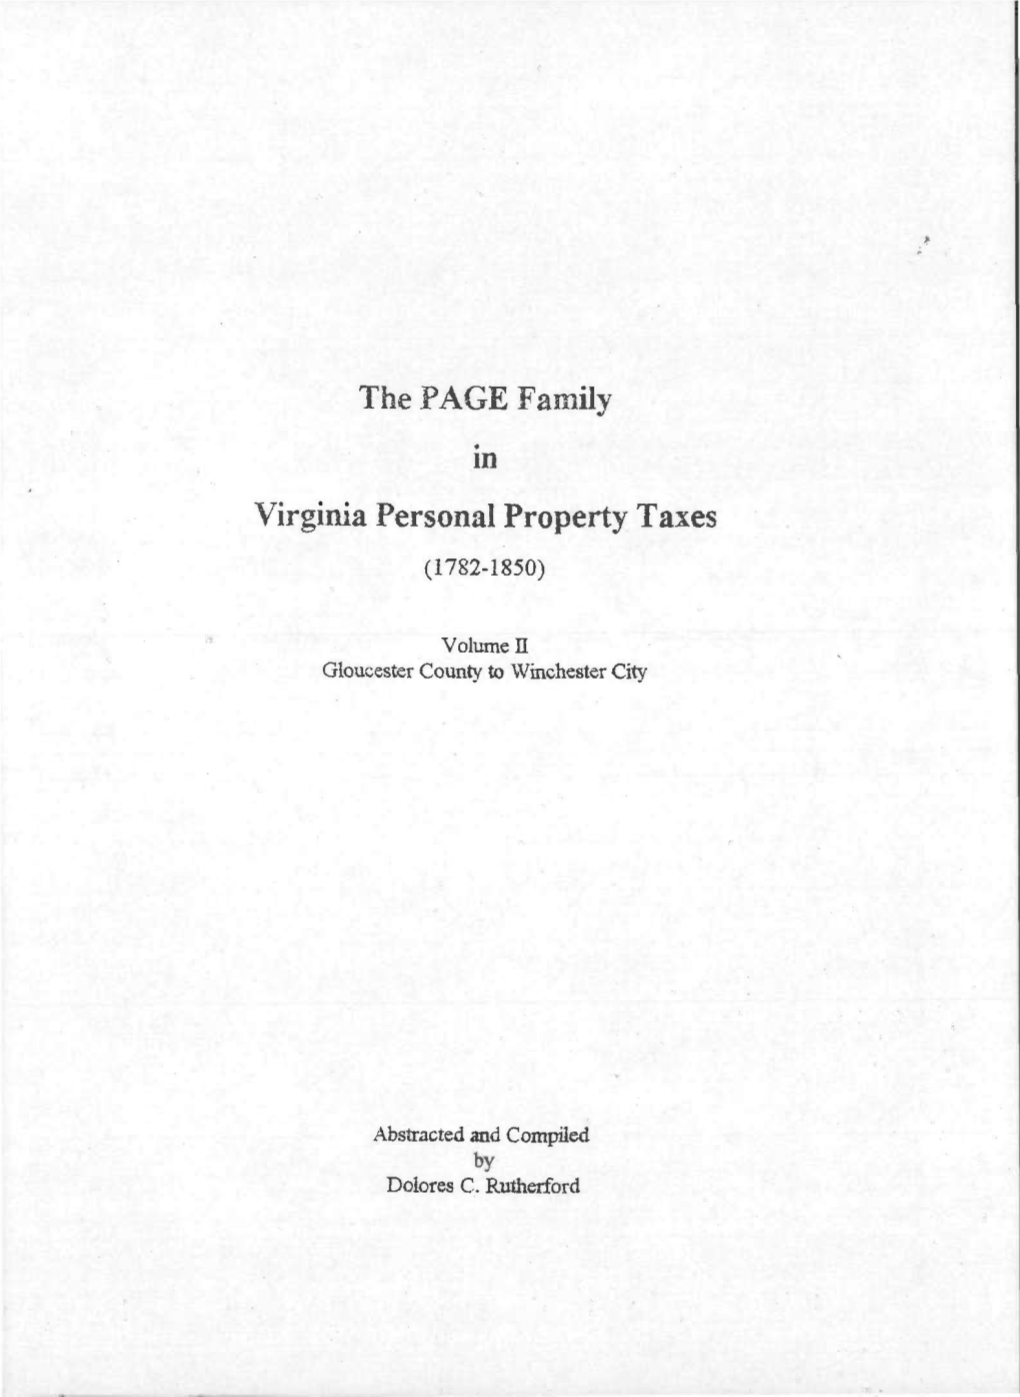 The PAGE Family in Virginia Personal Property Taxes (1782-1850)